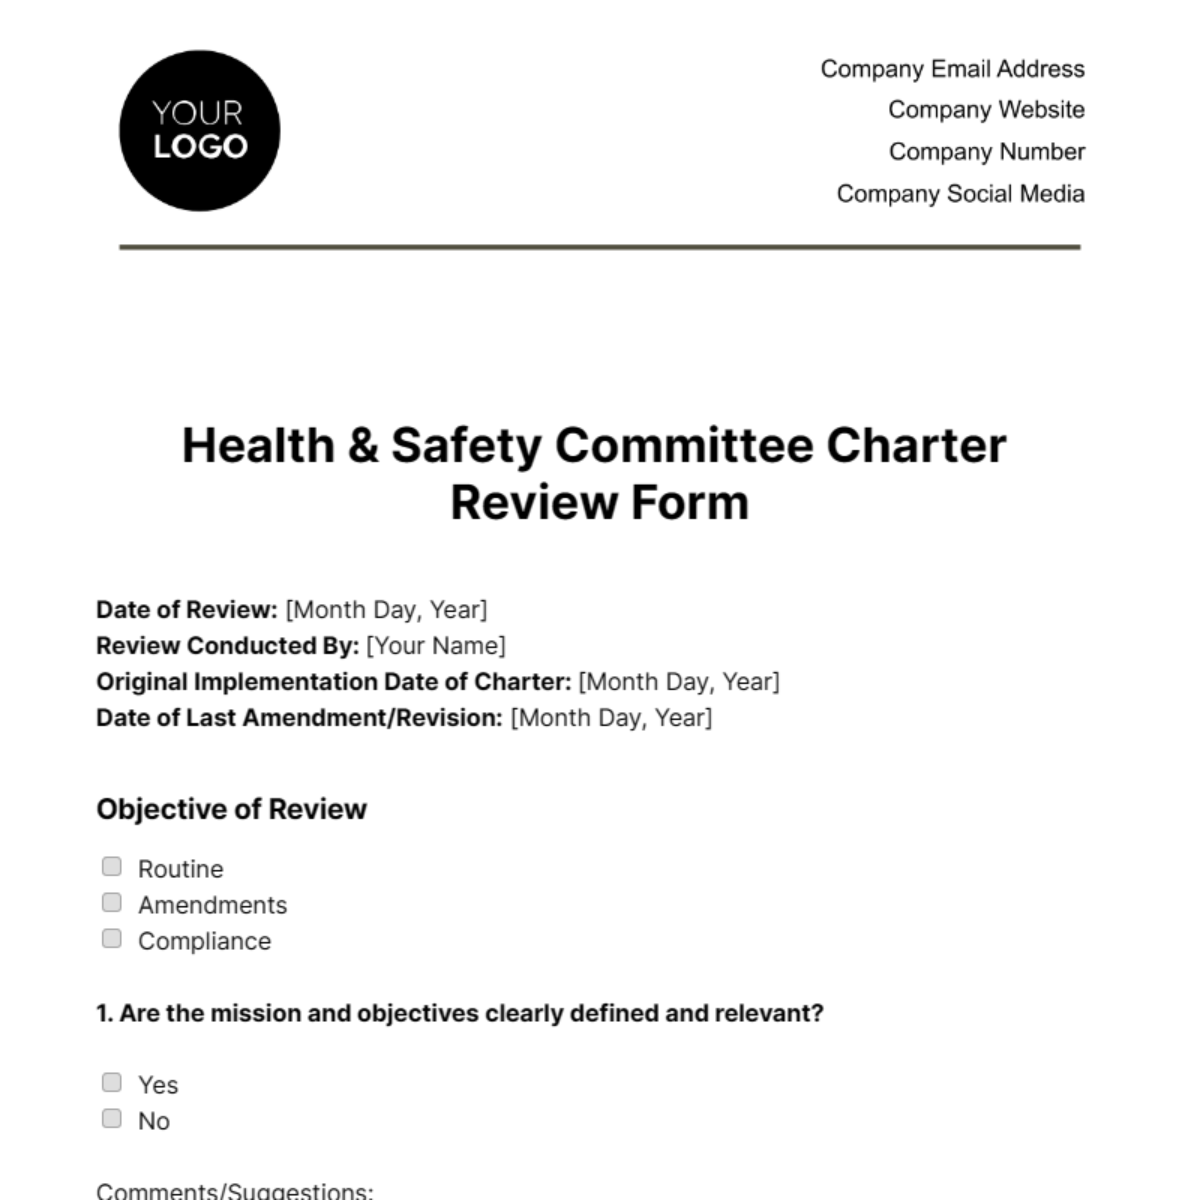 Health & Safety Committee Charter Review Form Template